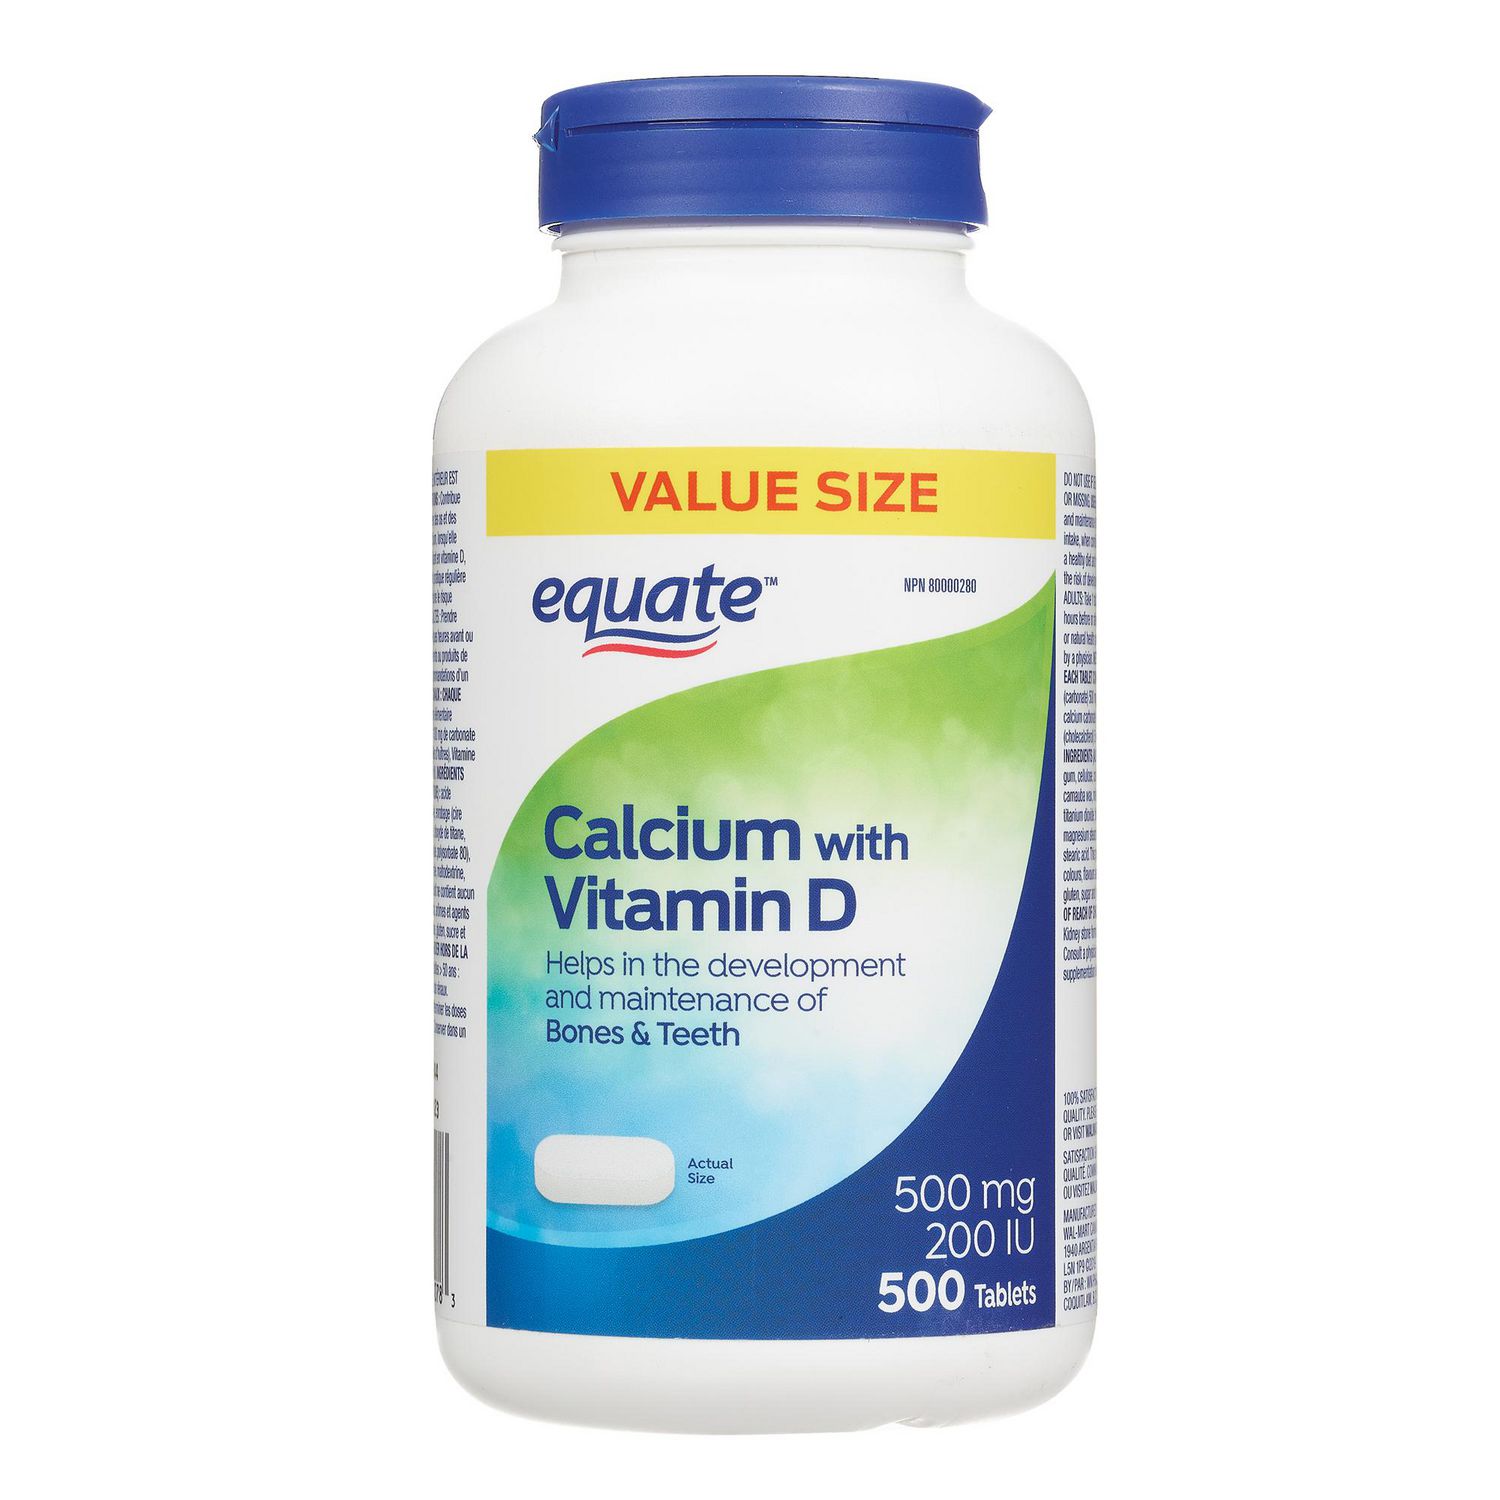 when should i take calcium carbonate and vitamin d tablets